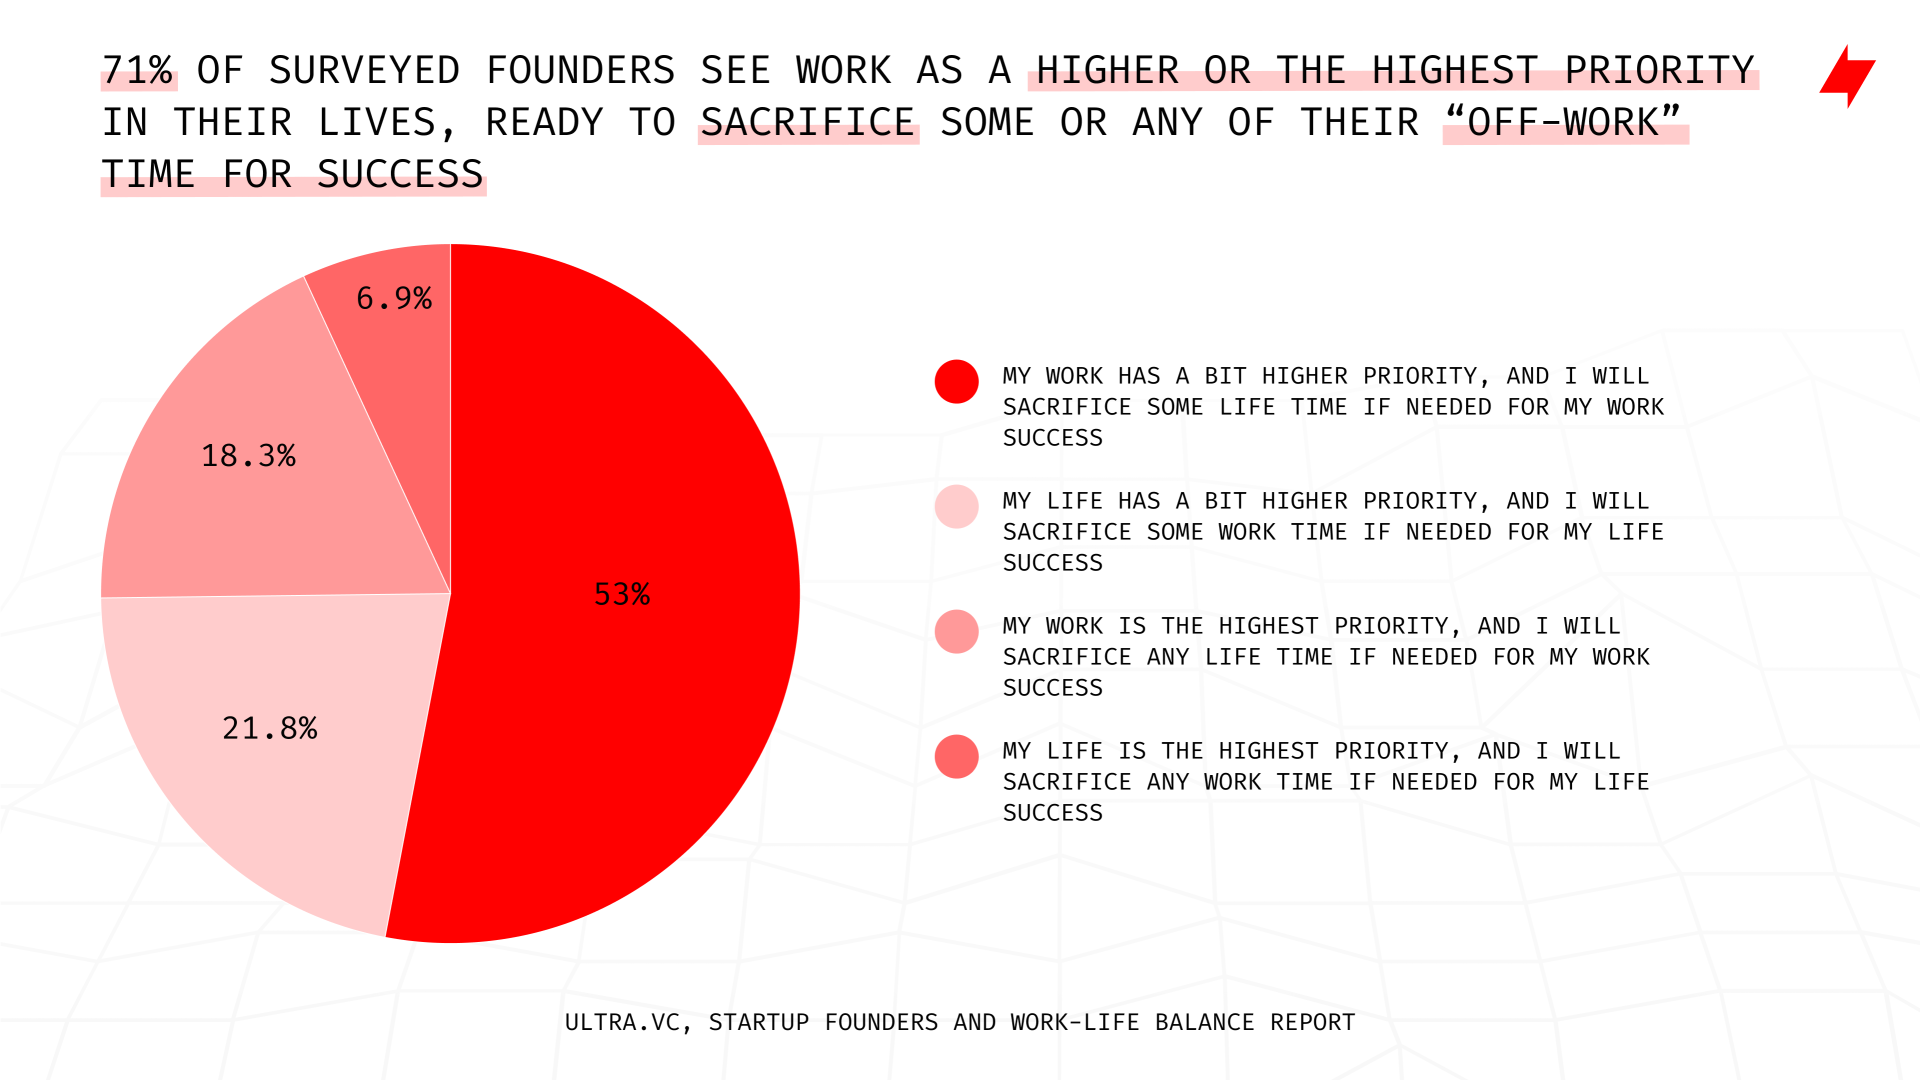 71% of Founders See Their Work as Their Highest Priority, Sacrificing Hobbies and Friends for It, TheRecursive.com